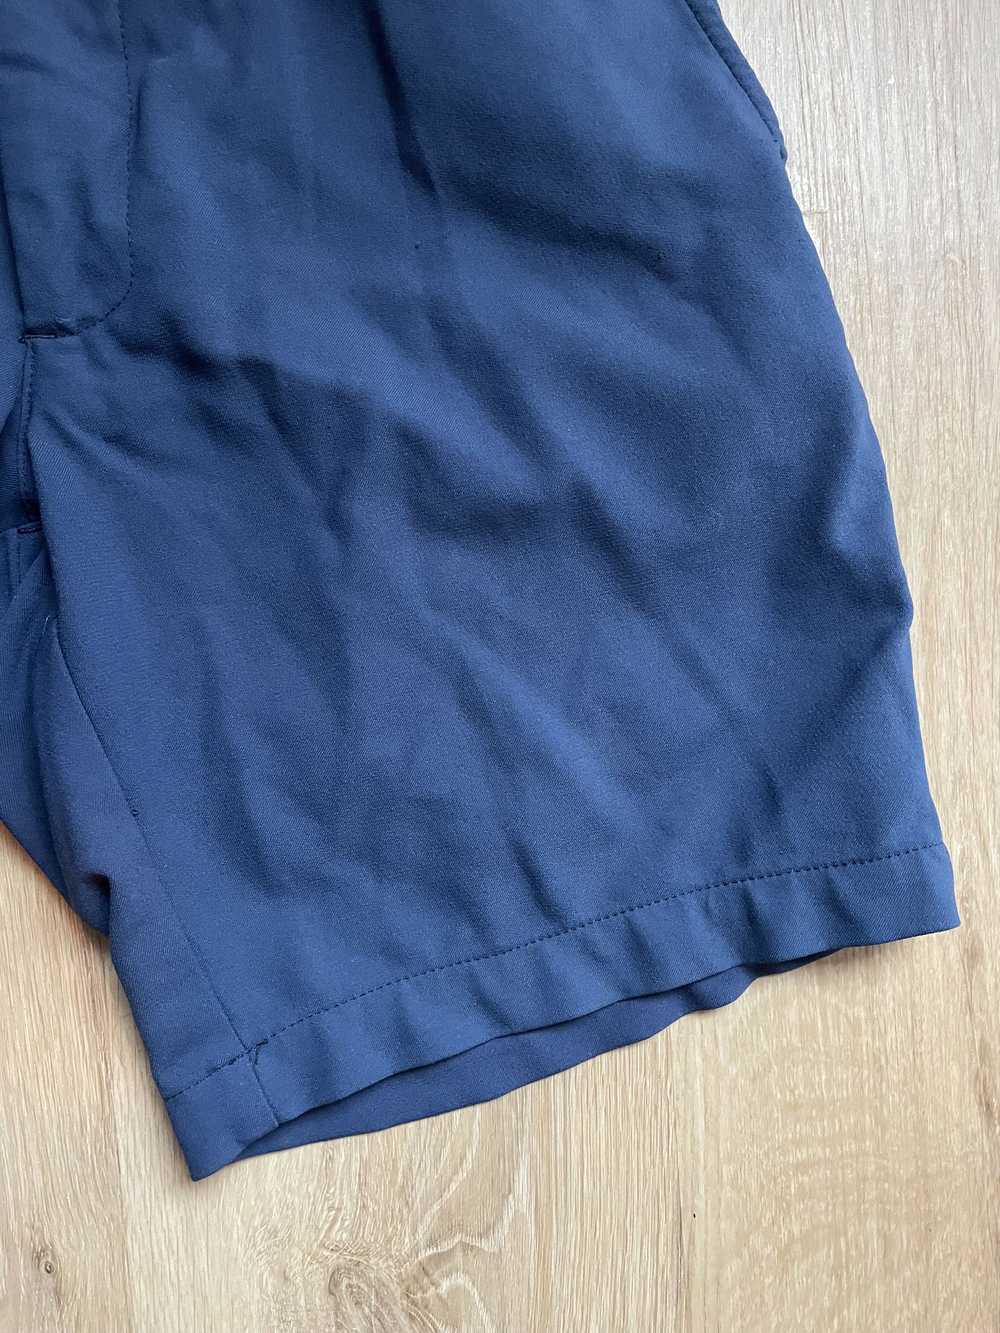 Outlier Outlier Three Way Shorts Navy Blue Men's … - image 4